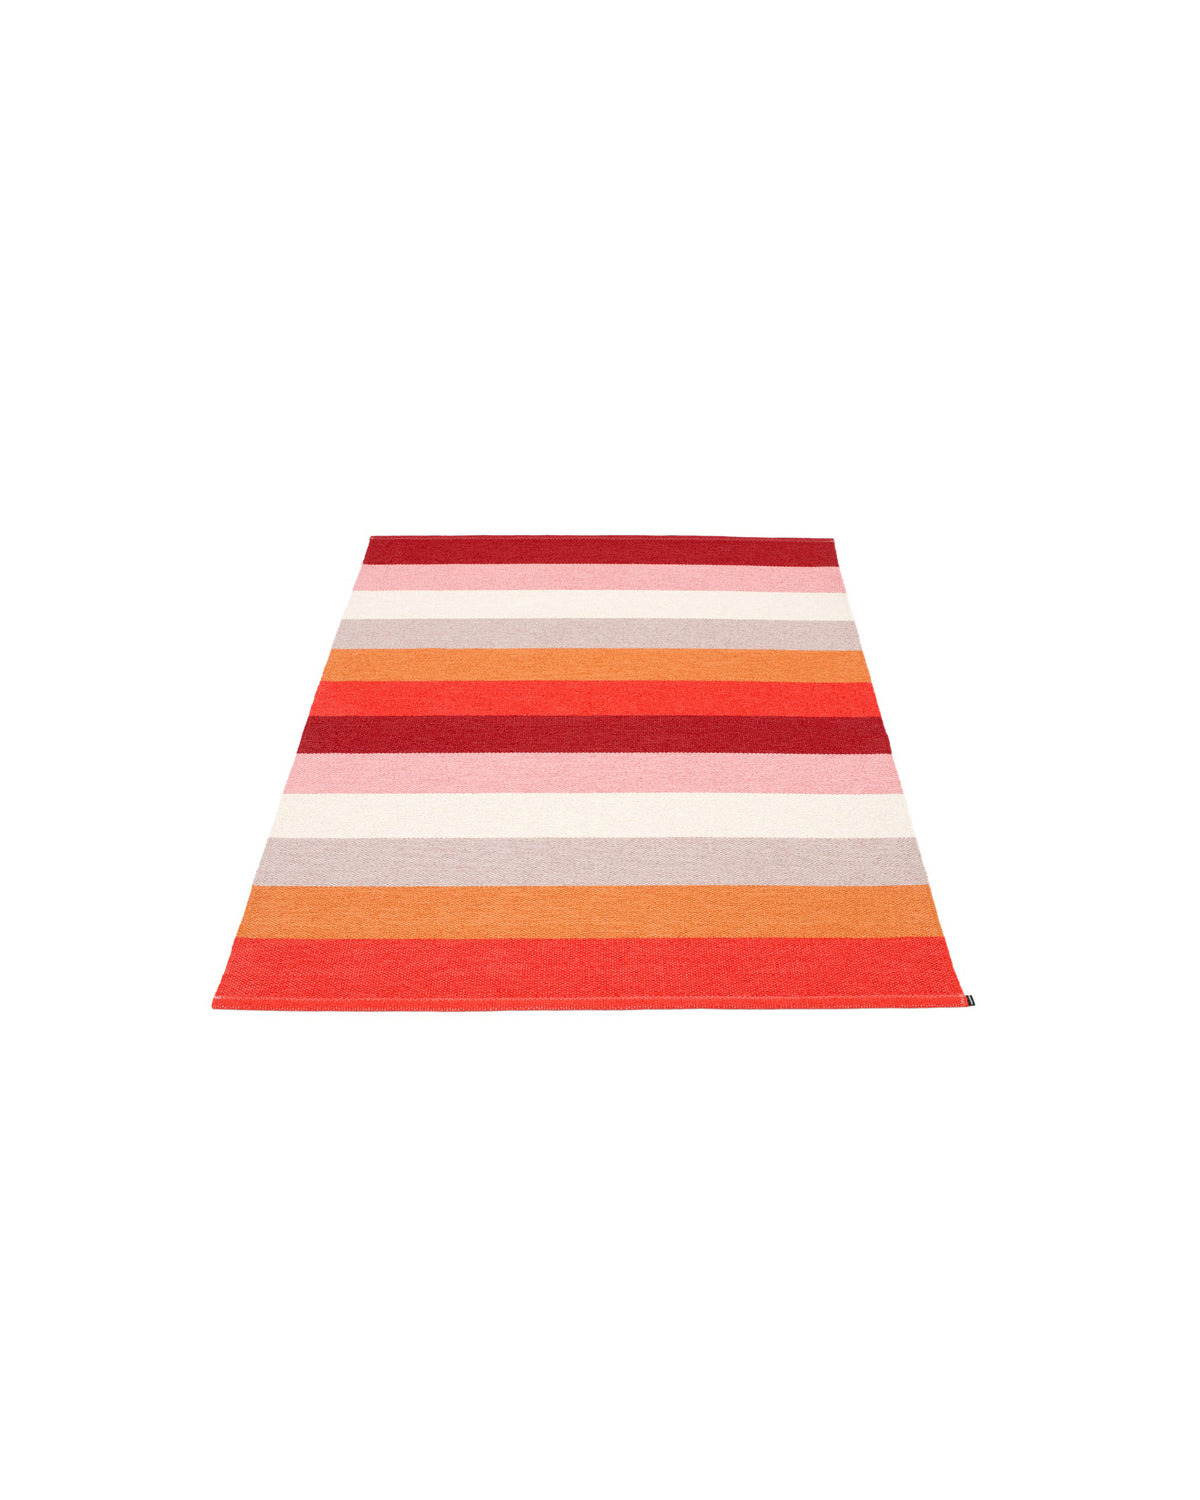 Pappelina Rug MOLLY Sunset 4.5 x 6.5 ft  image 1